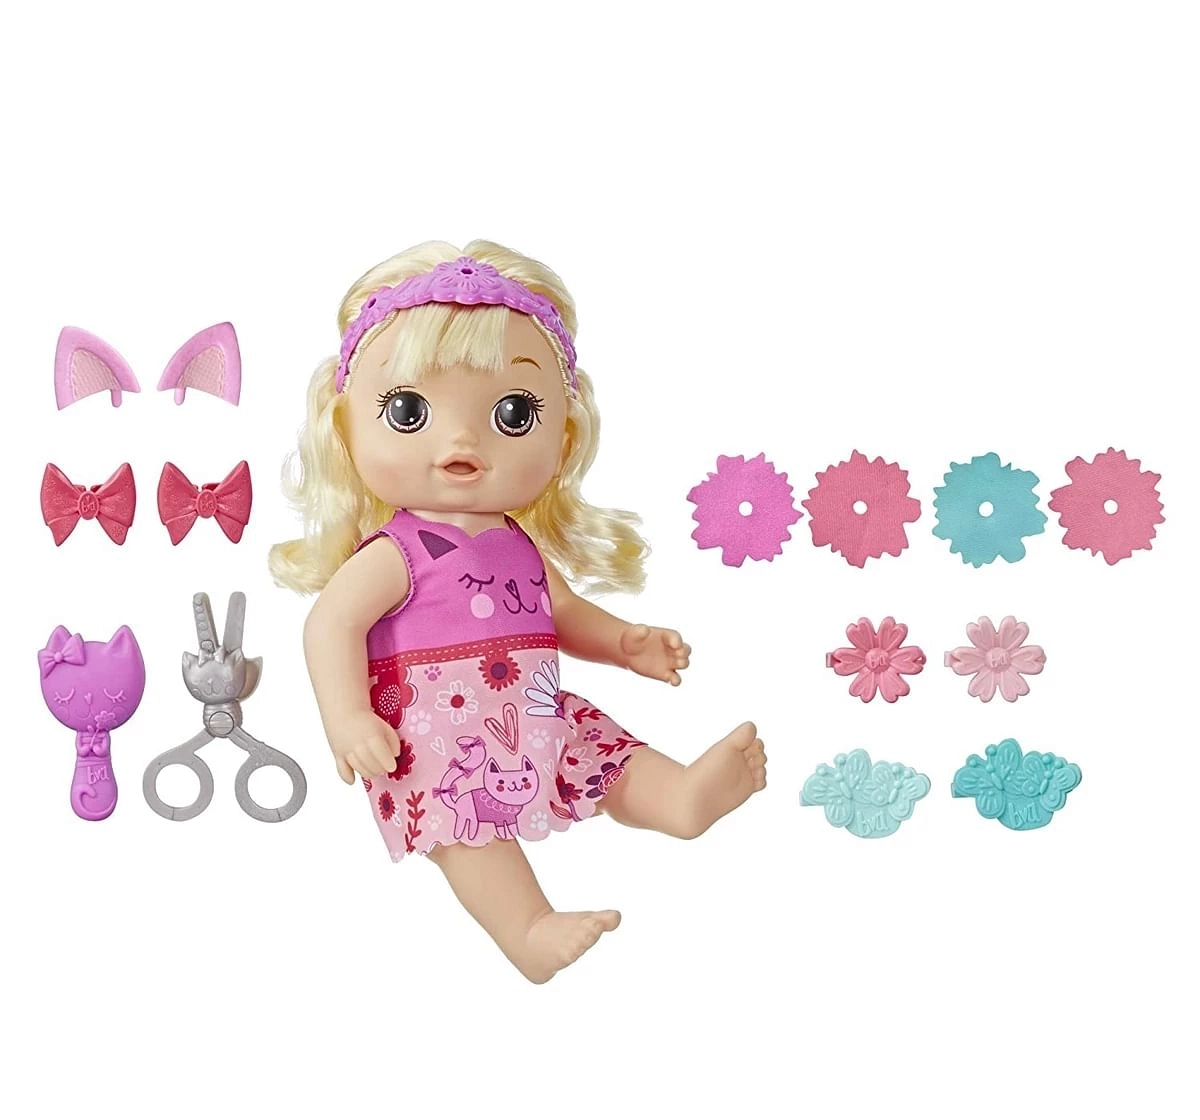 Baby Alive Snip and Style Baby Blonde Hair Toy for Kids above 3Y+, Multicolour